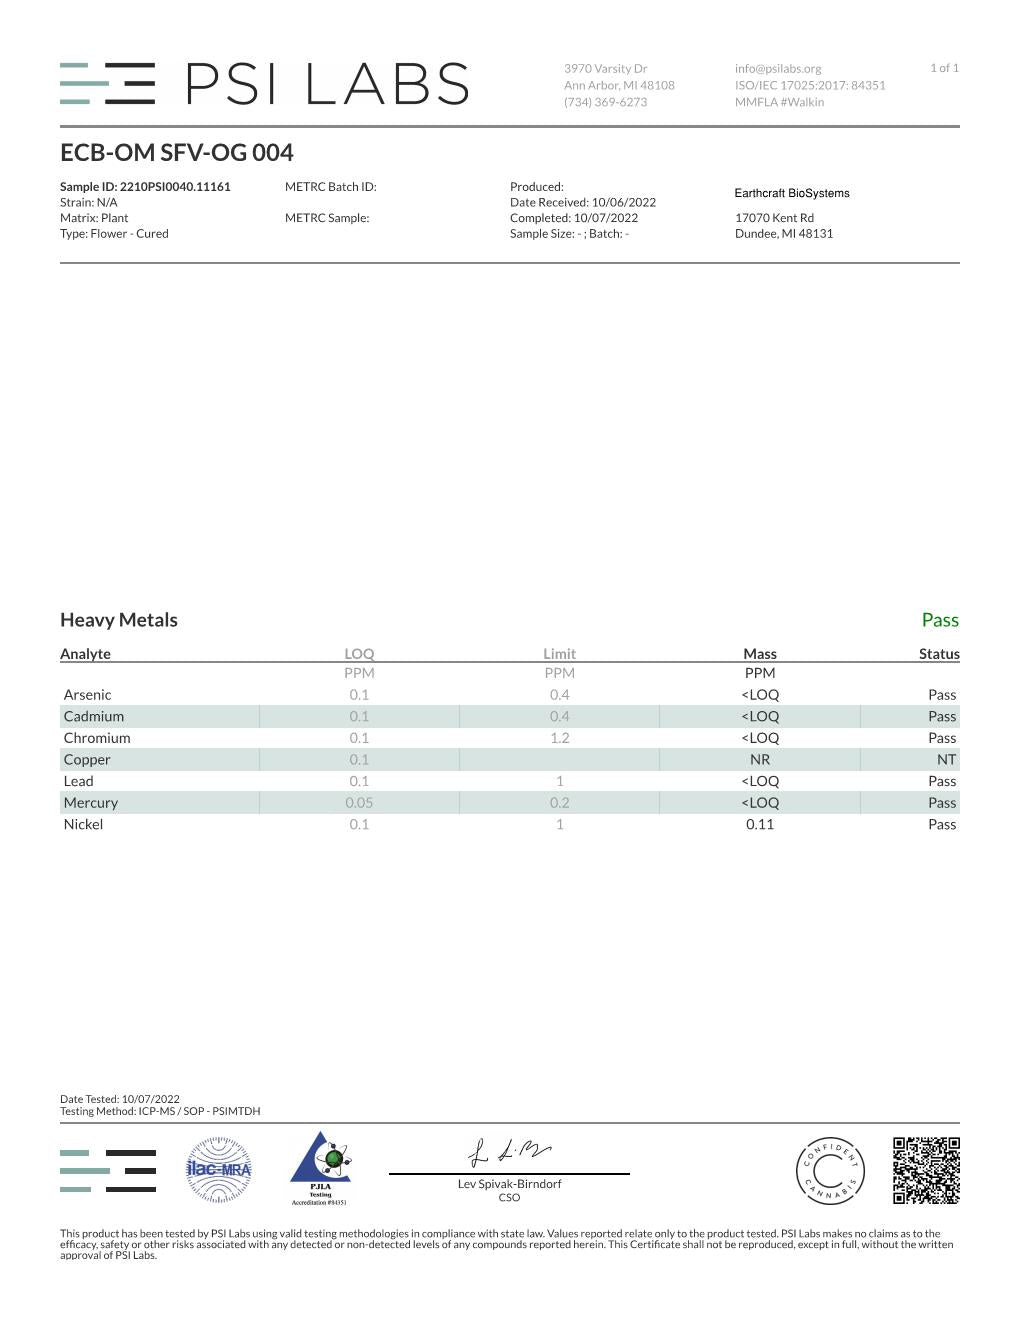 Test results for Earthcraft Biosystems Nutrients